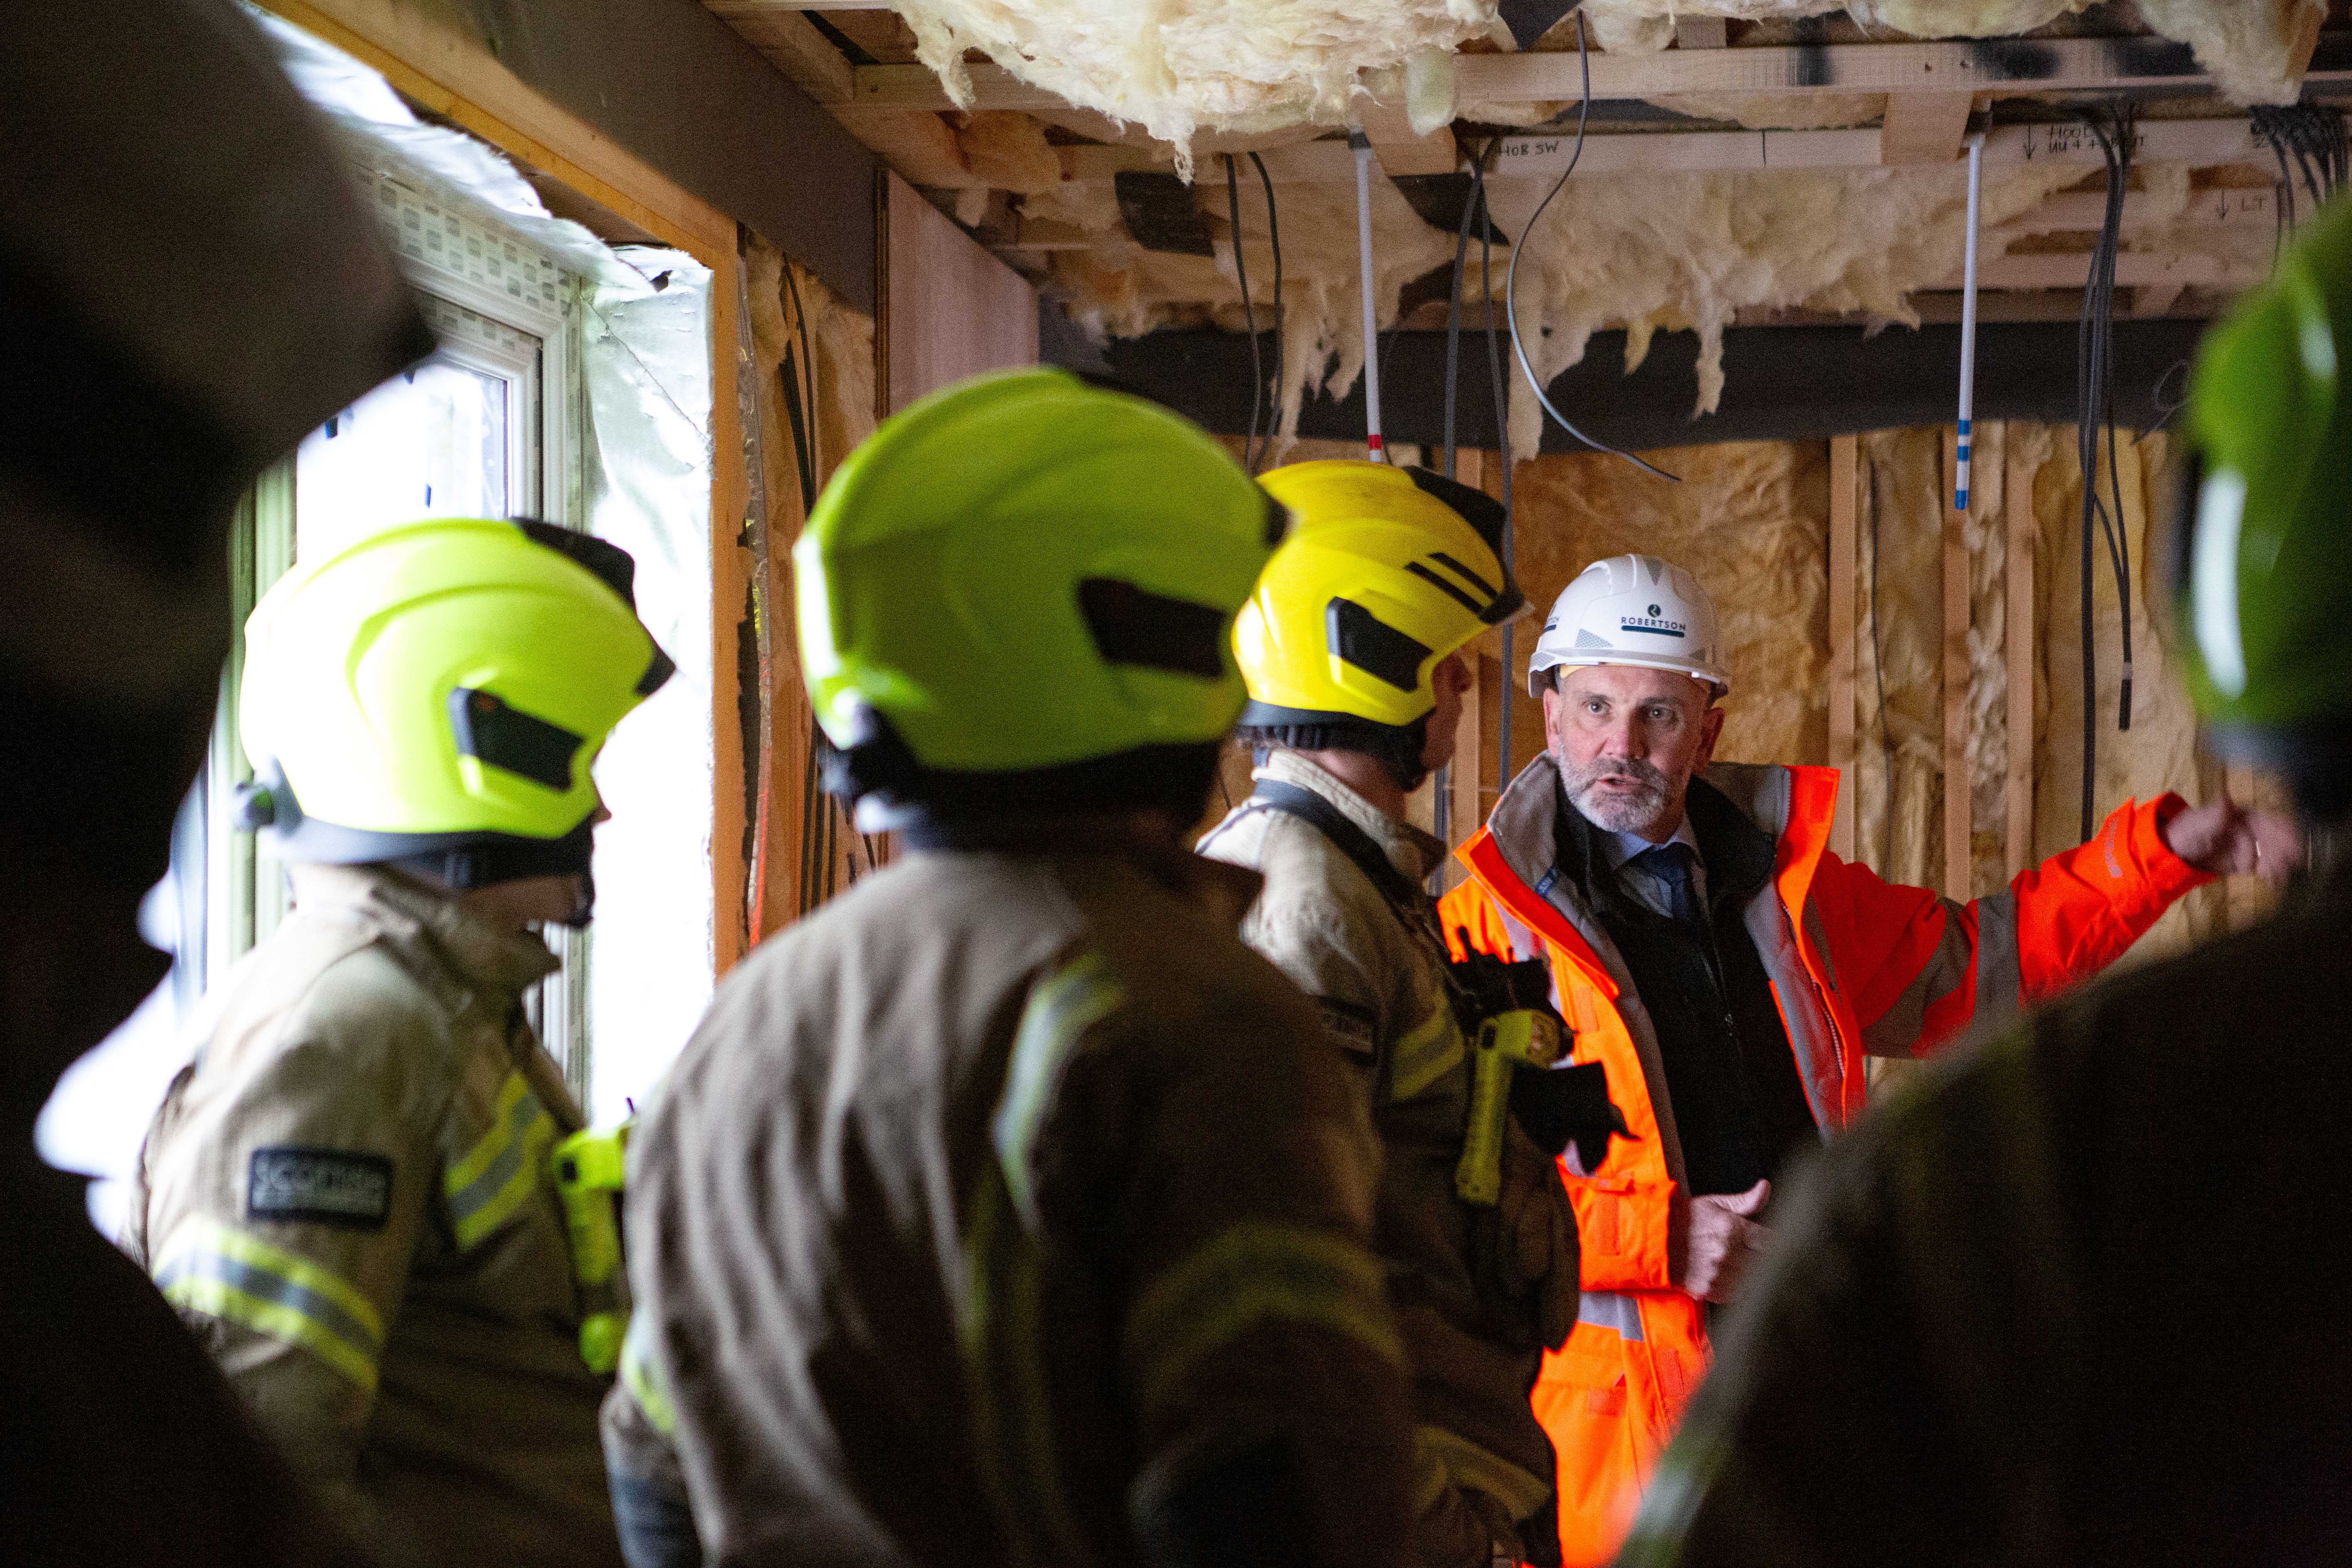 Robertson Homes supports fire service training in Inverness